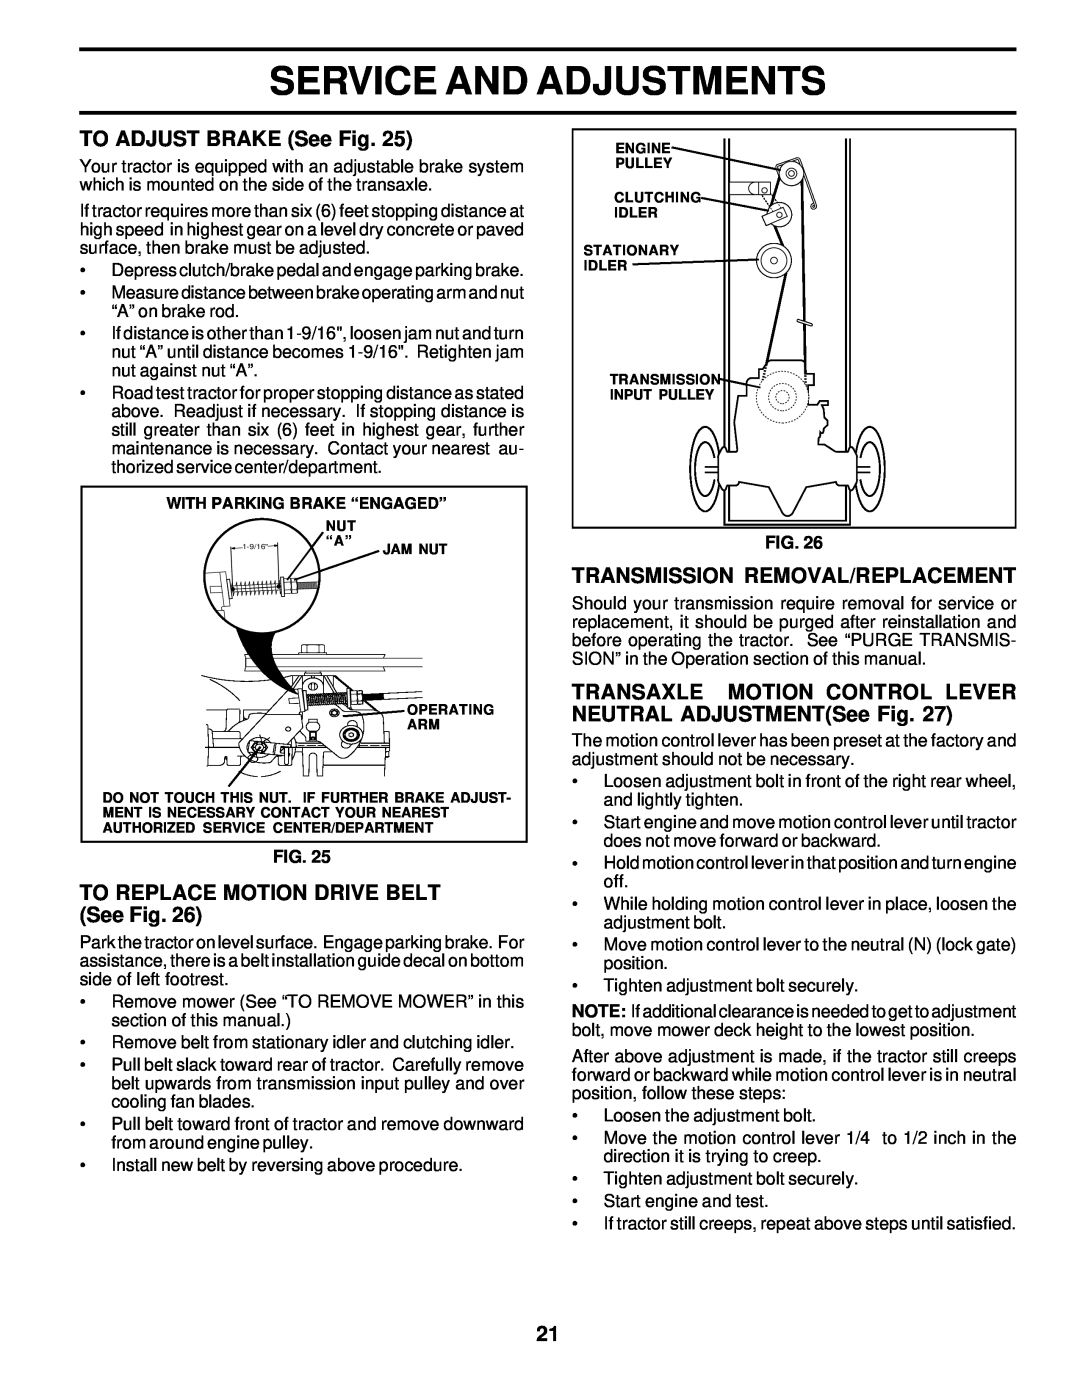 Poulan 177029 owner manual TO ADJUST BRAKE See Fig, TO REPLACE MOTION DRIVE BELT See Fig, Transmission Removal/Replacement 